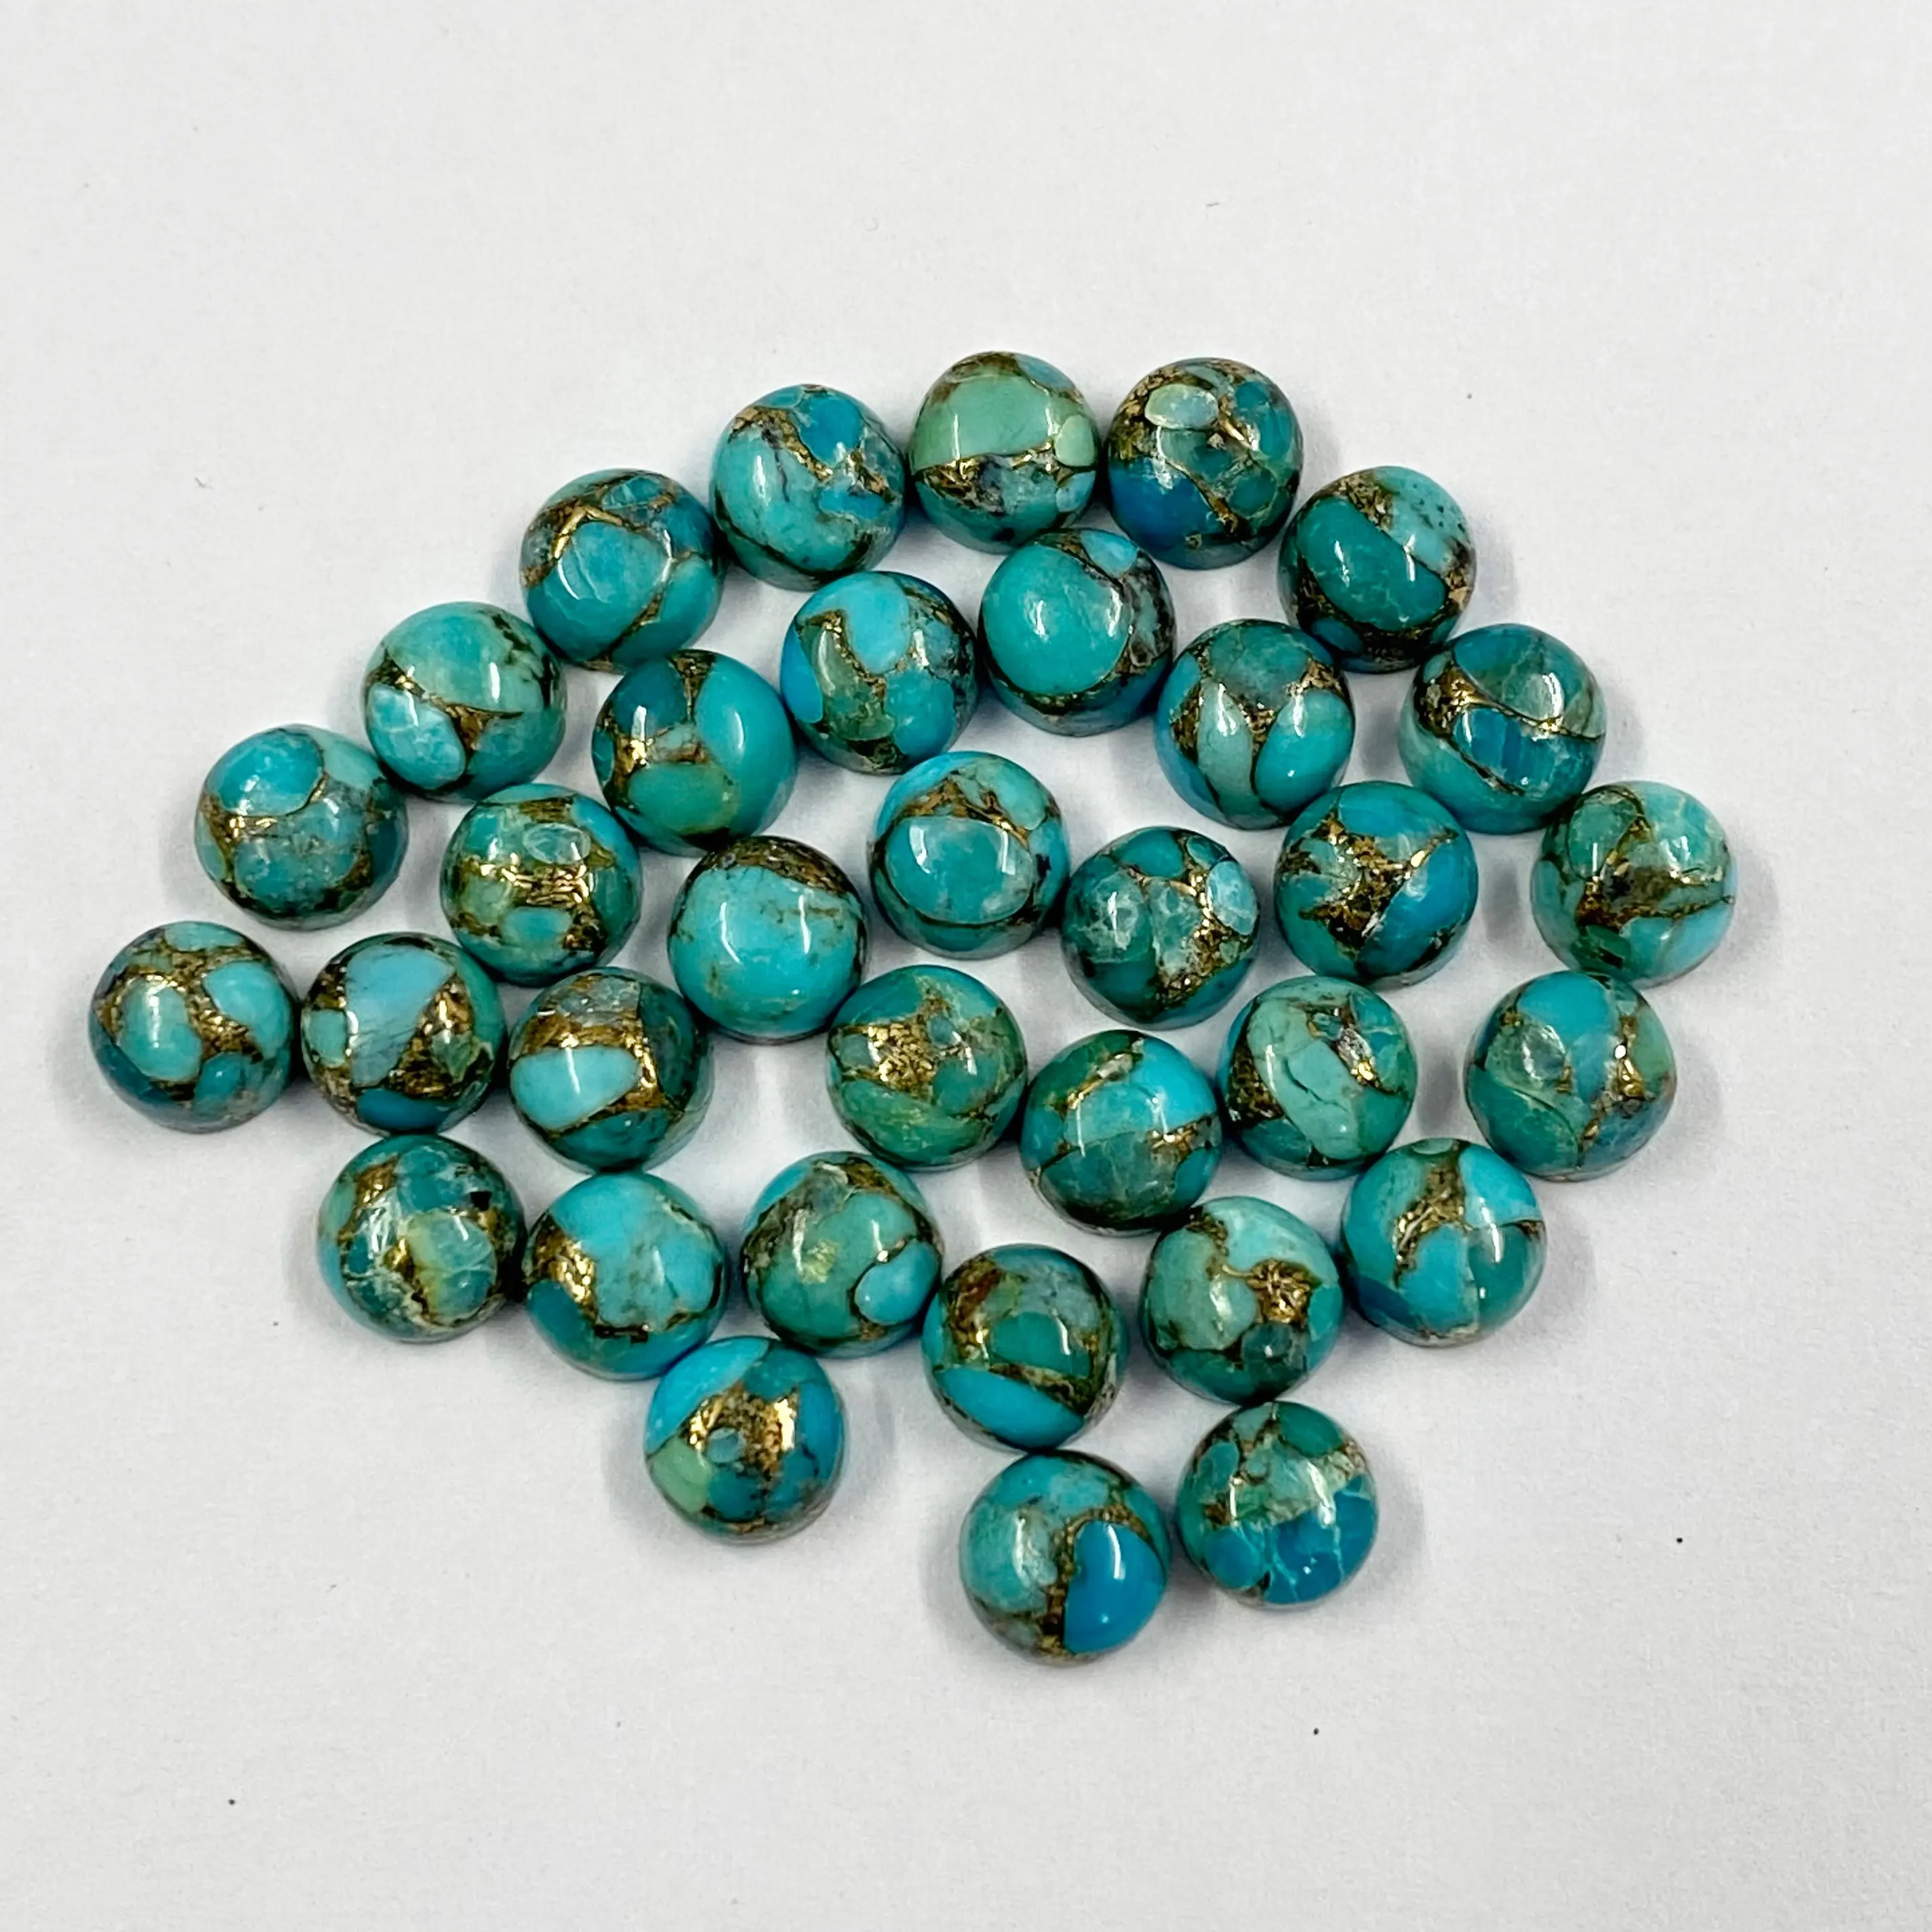 Beautiful High Quality Wholesale Price Natural 6mm Blue Copper Turquoise Round Wholesale Cabochon Semi Precious Loose Gemstone